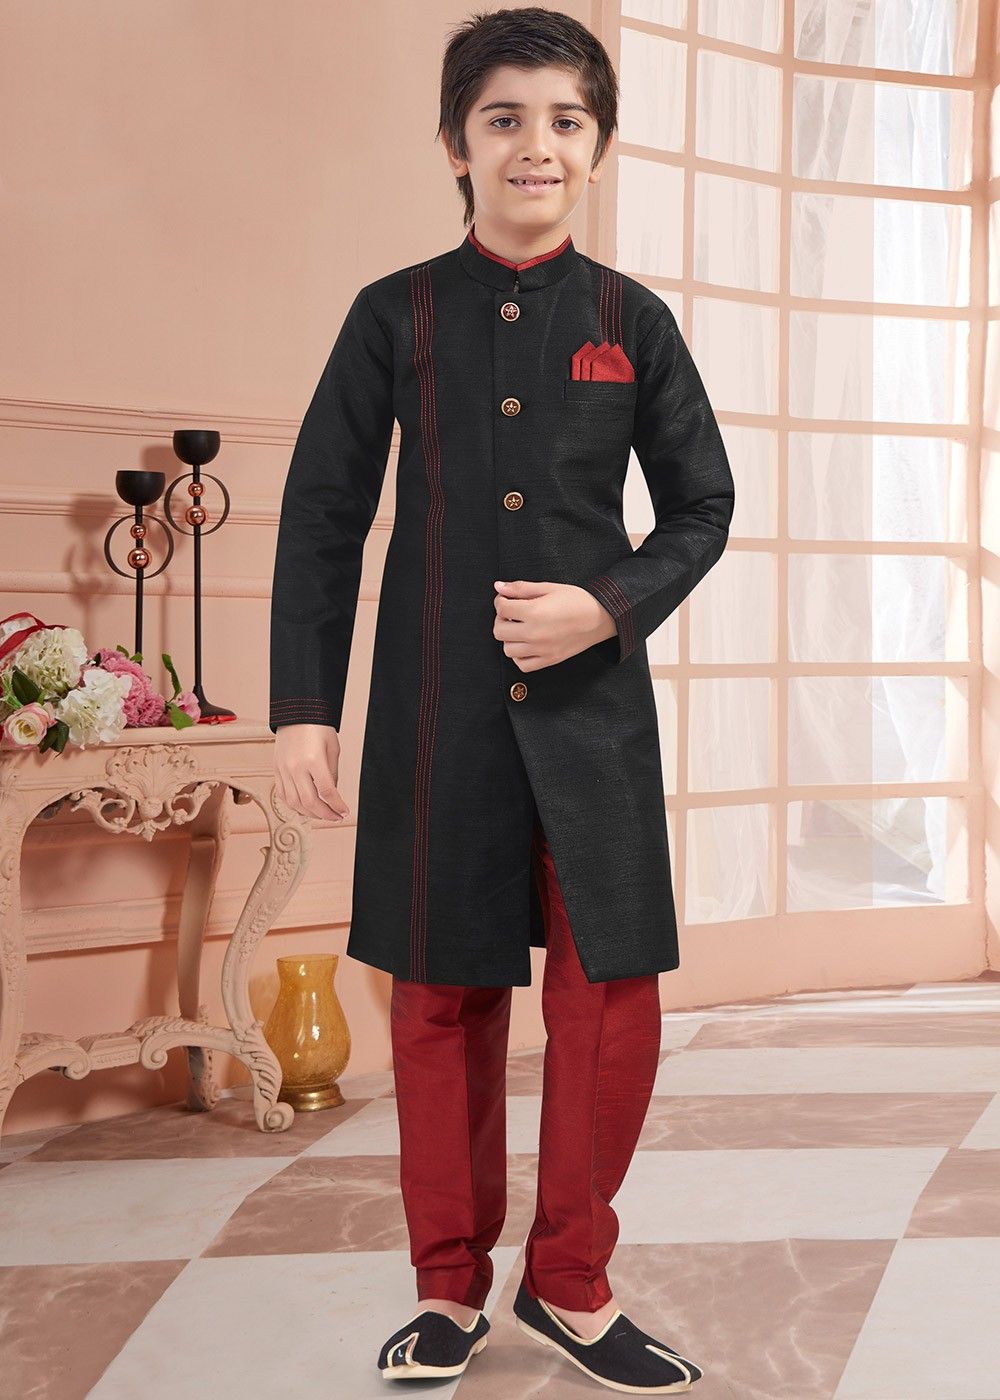 Top 6 Indian Wedding Outfits for Grooms | Sherwani for men wedding, Indian  bride photography poses, Indian wedding poses